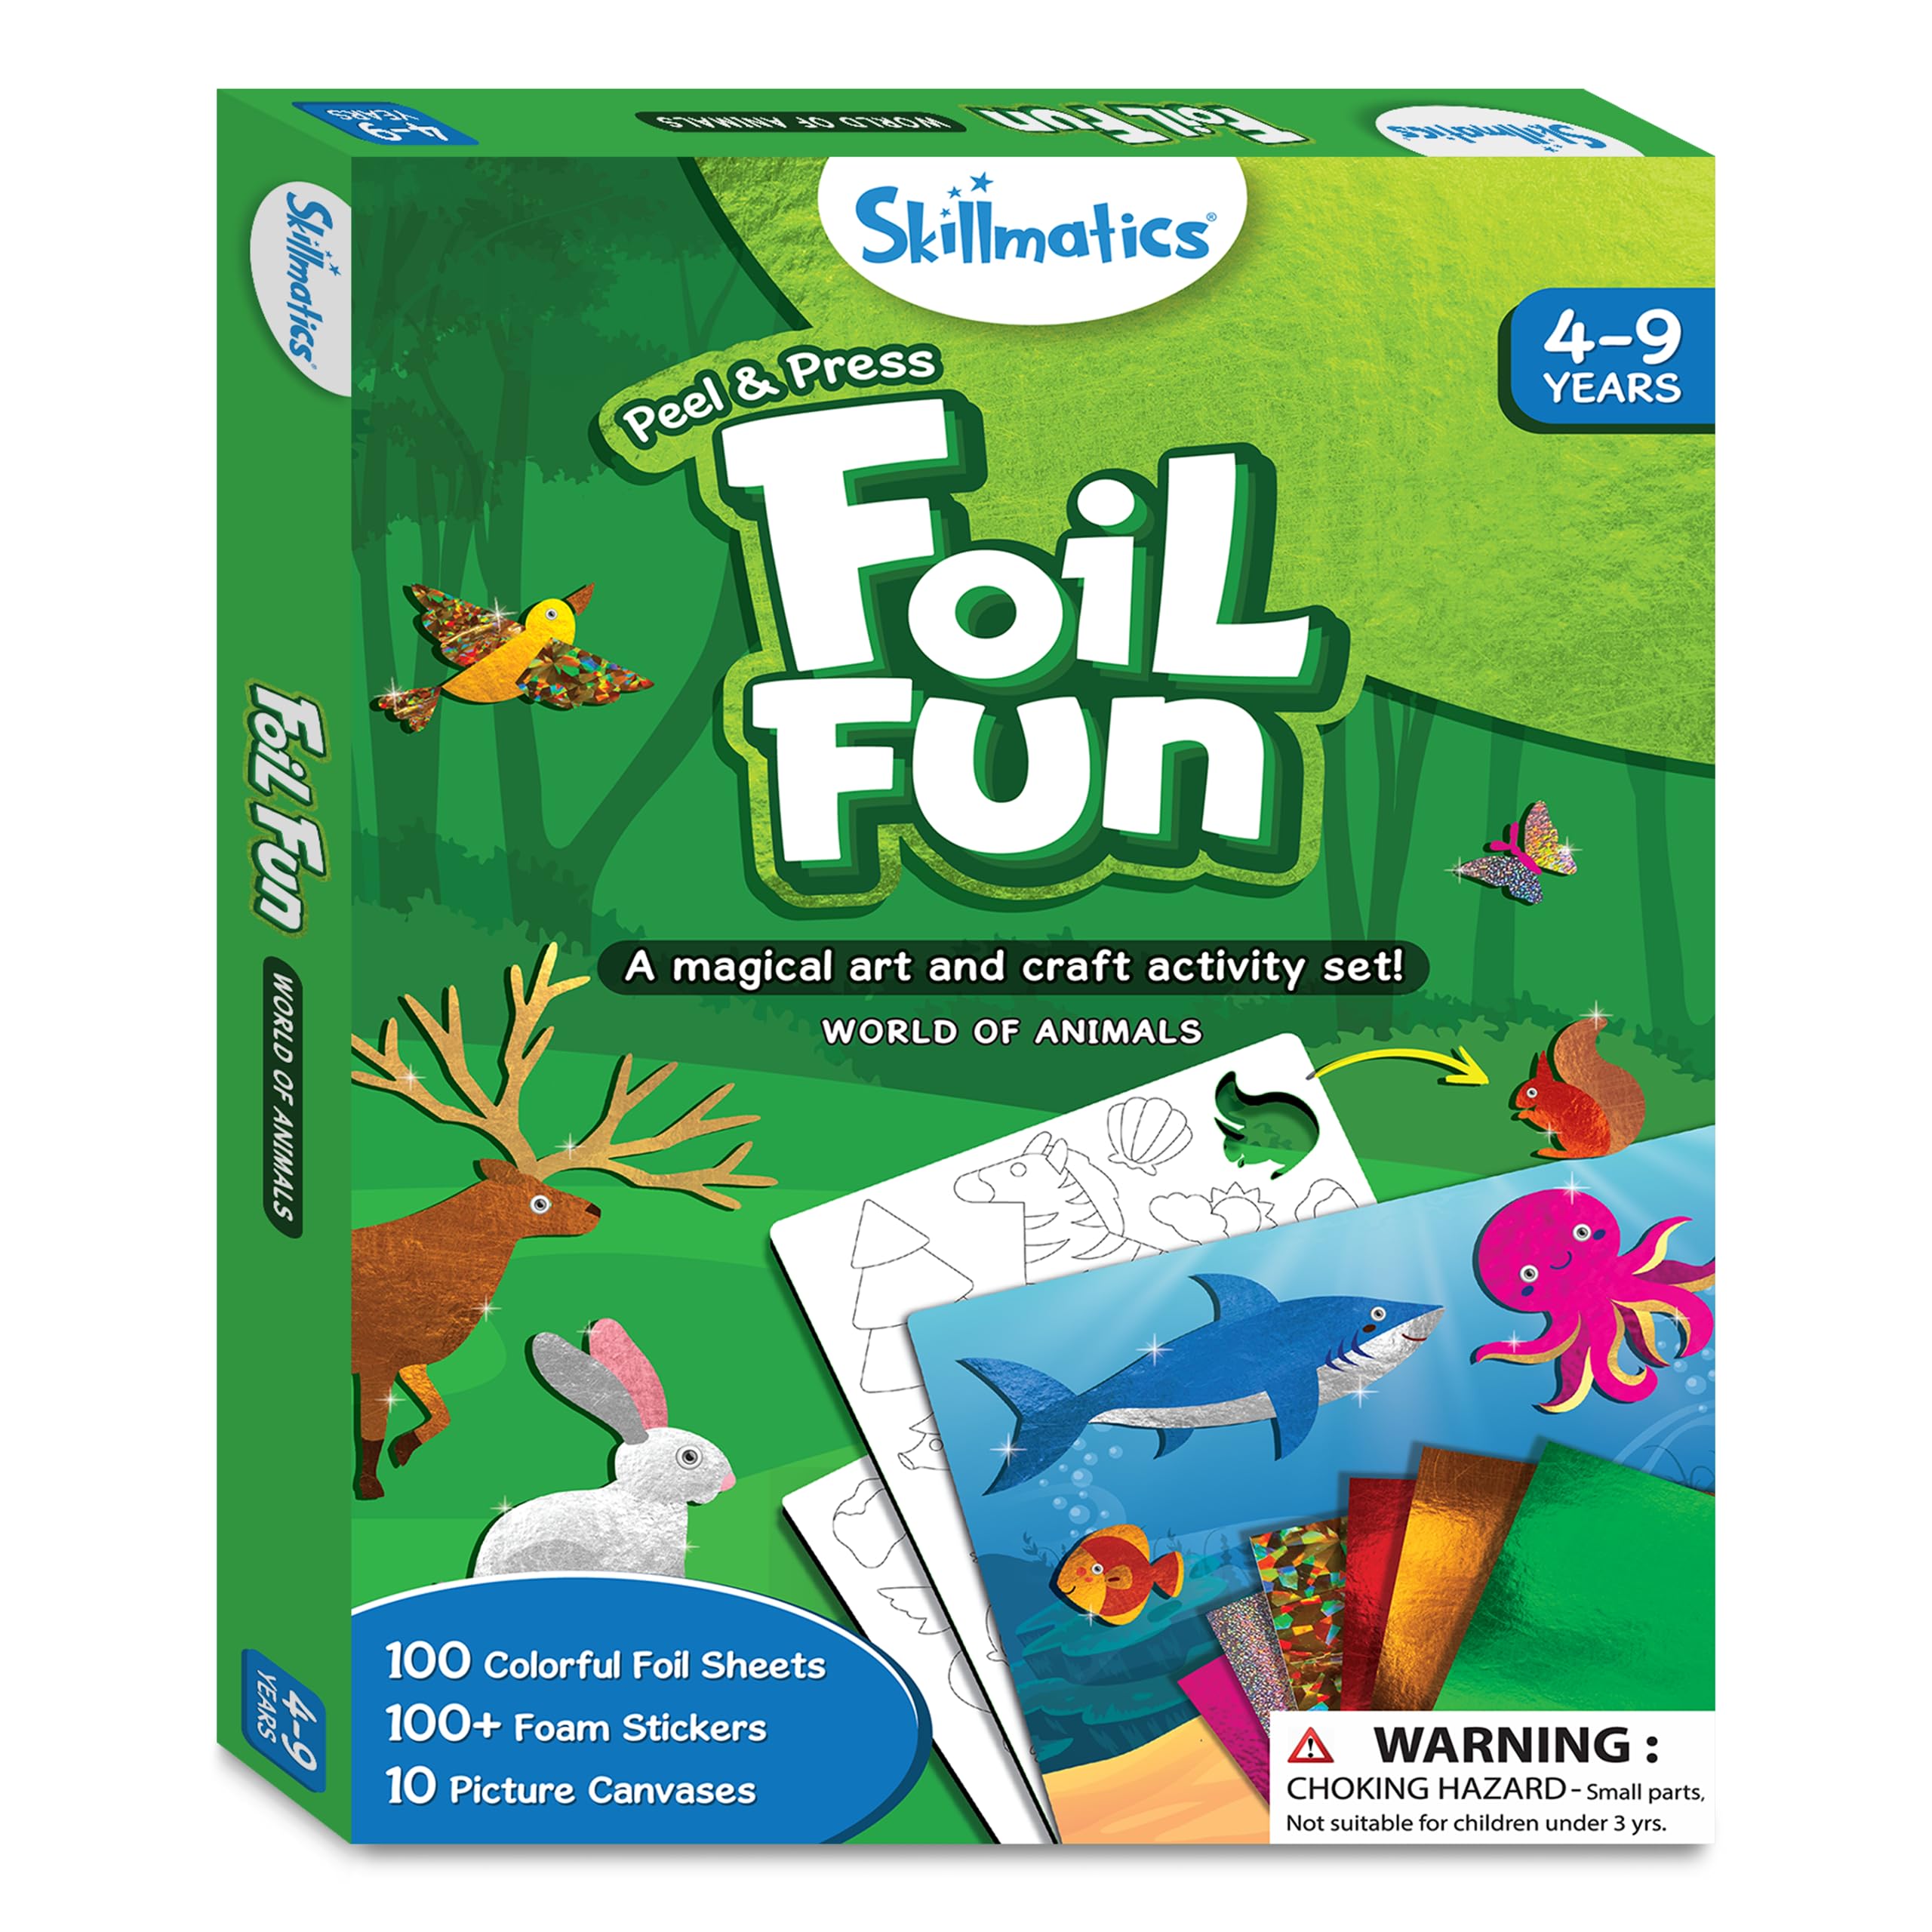 Skillmatics Art & Craft Activity - Foil Fun Animals, No Mess Art for Kids, Craft Kits, DIY Activity, Gifts for Ages 4 to 9